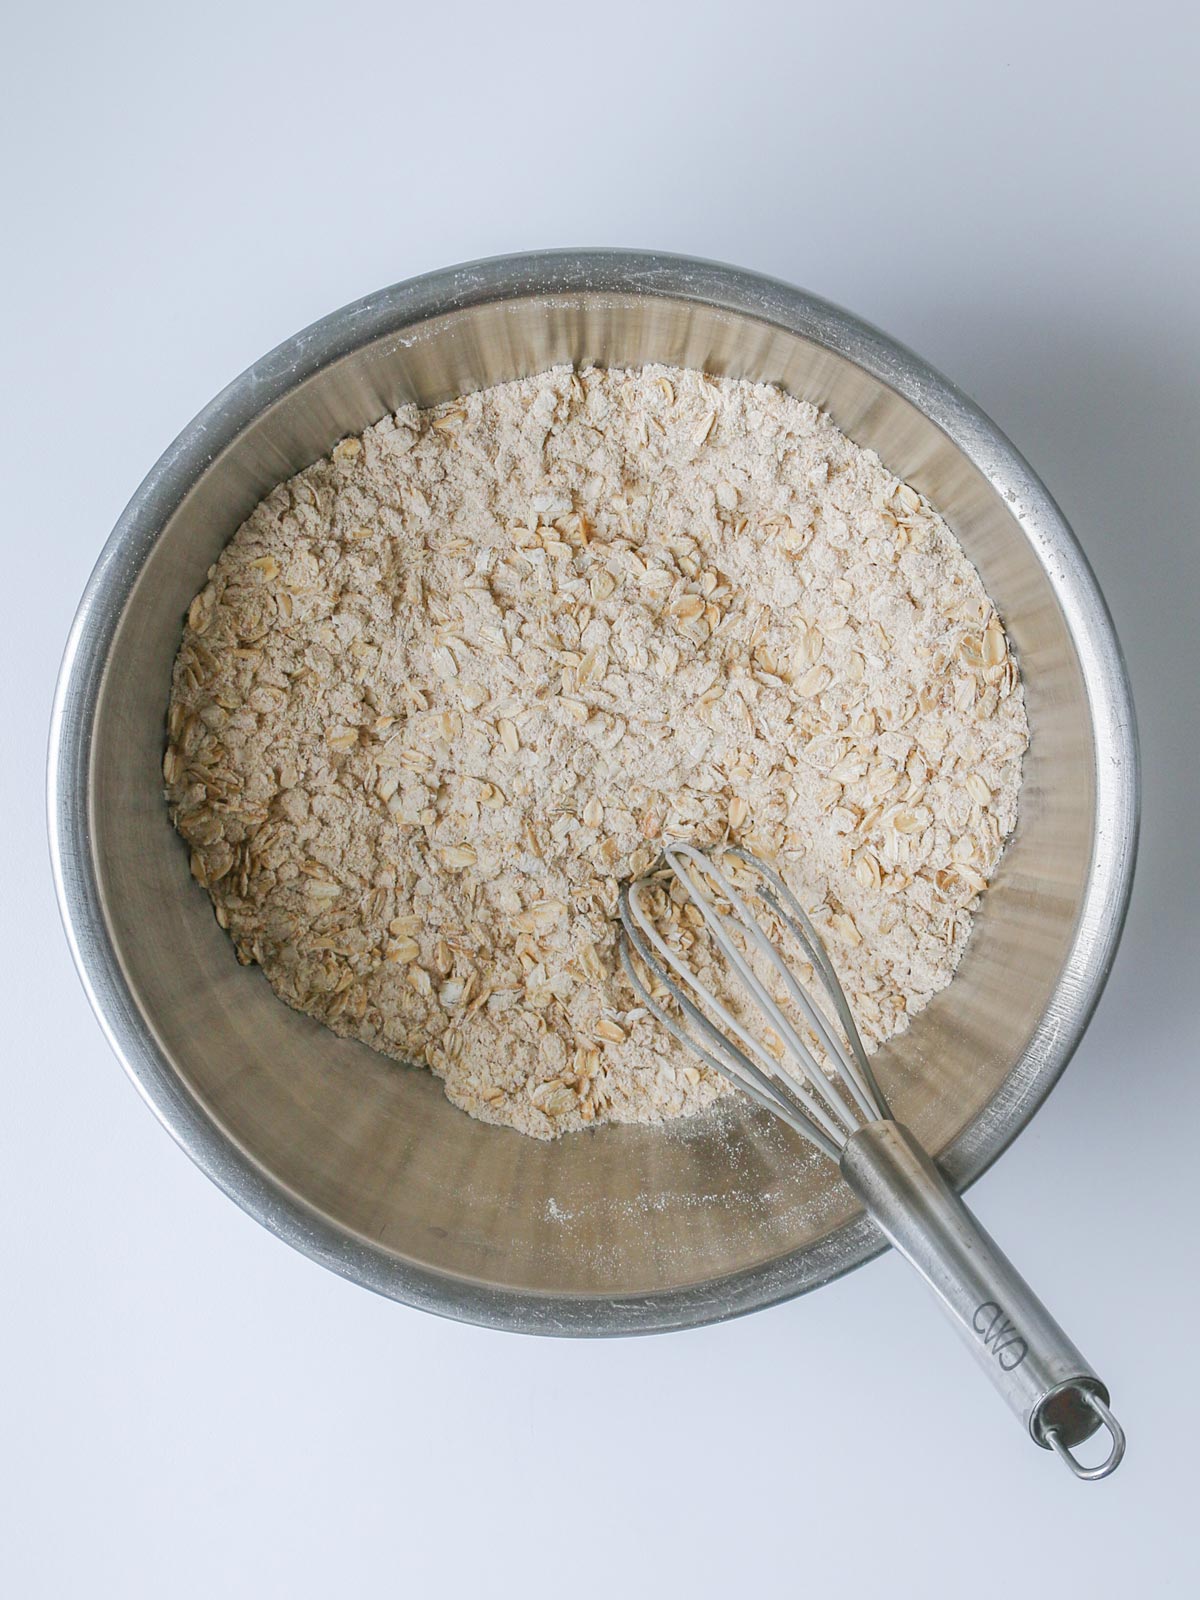 dry ingredients whisked together in bowl.